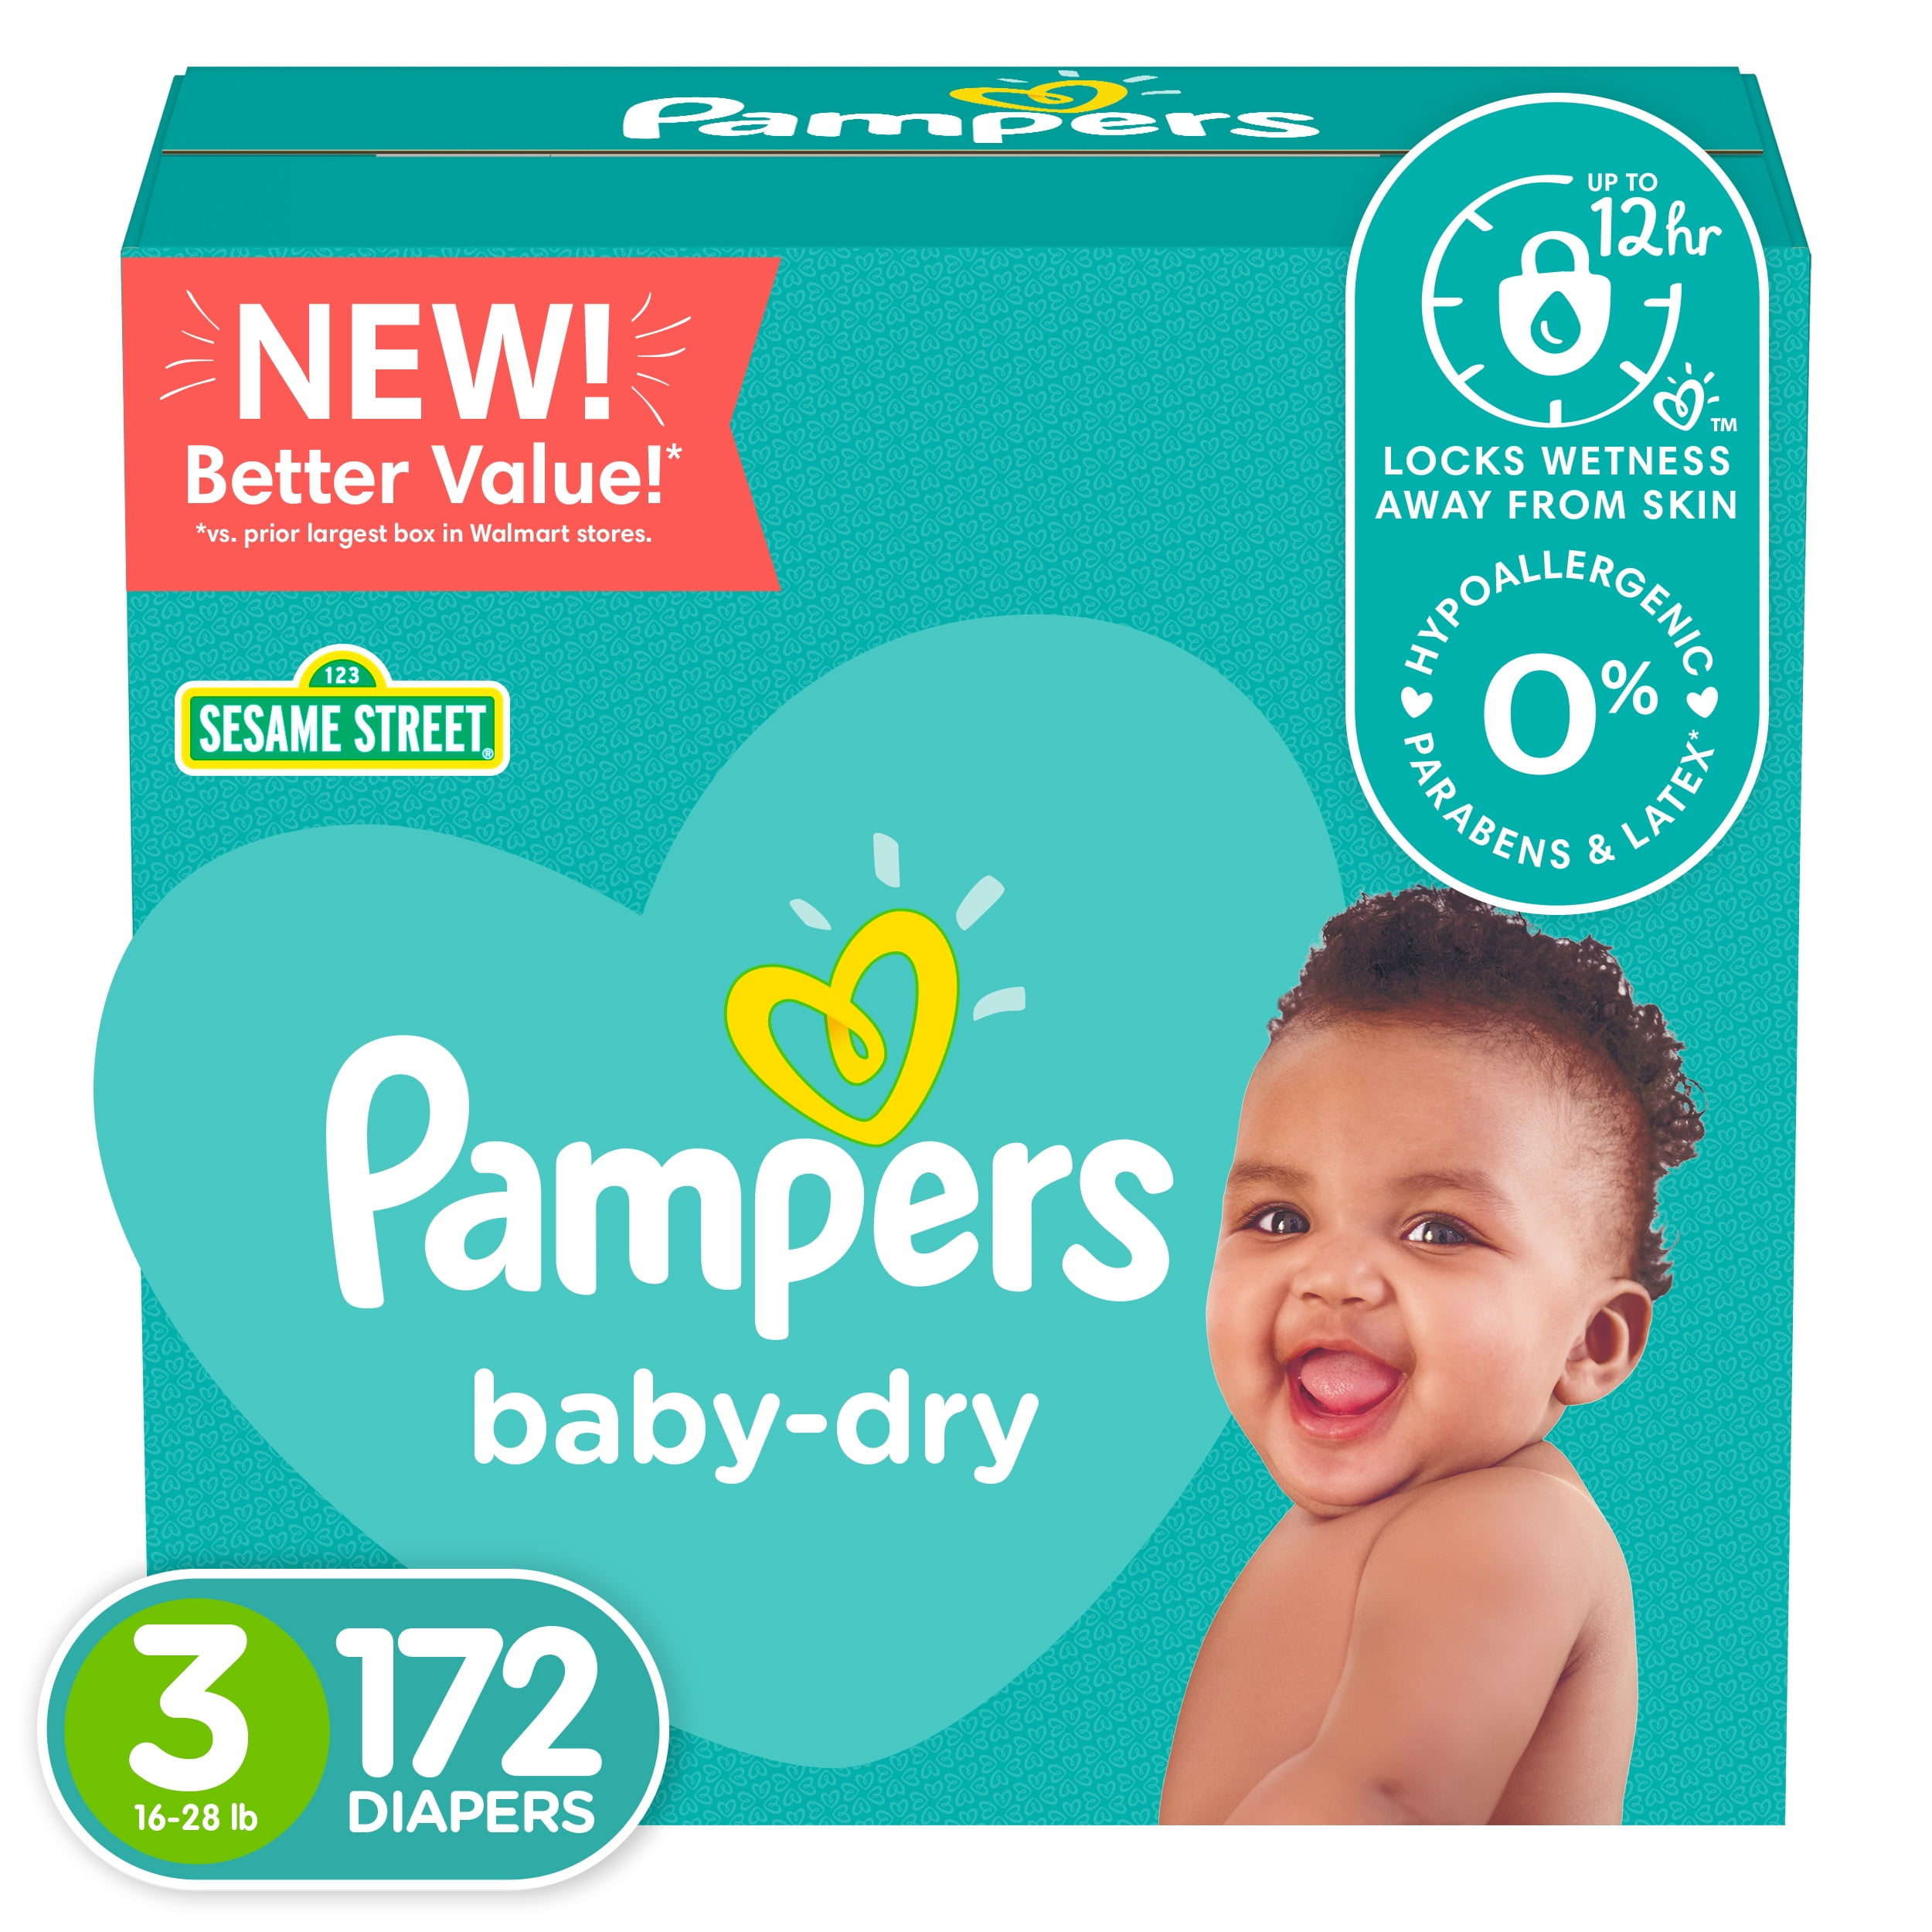 klei Oefening pasta Pampers Baby-Dry Extra Protection Diapers, Size 3, 172 Count - Walmart.com